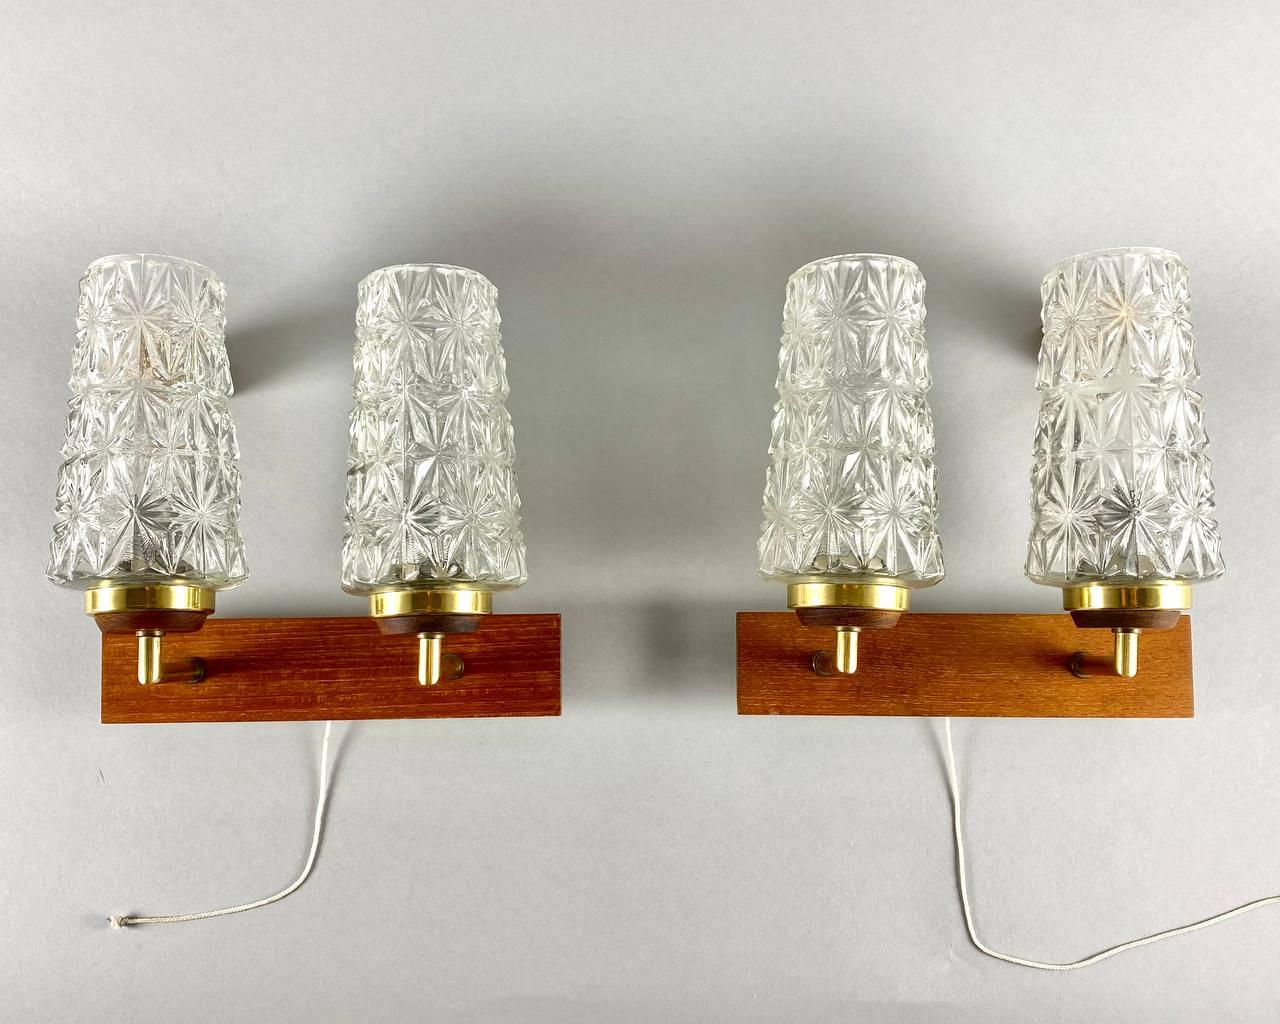 German Stylish Double Arm Wall Lamps Paired Wall Sconces with Glass Shade on Wood For Sale